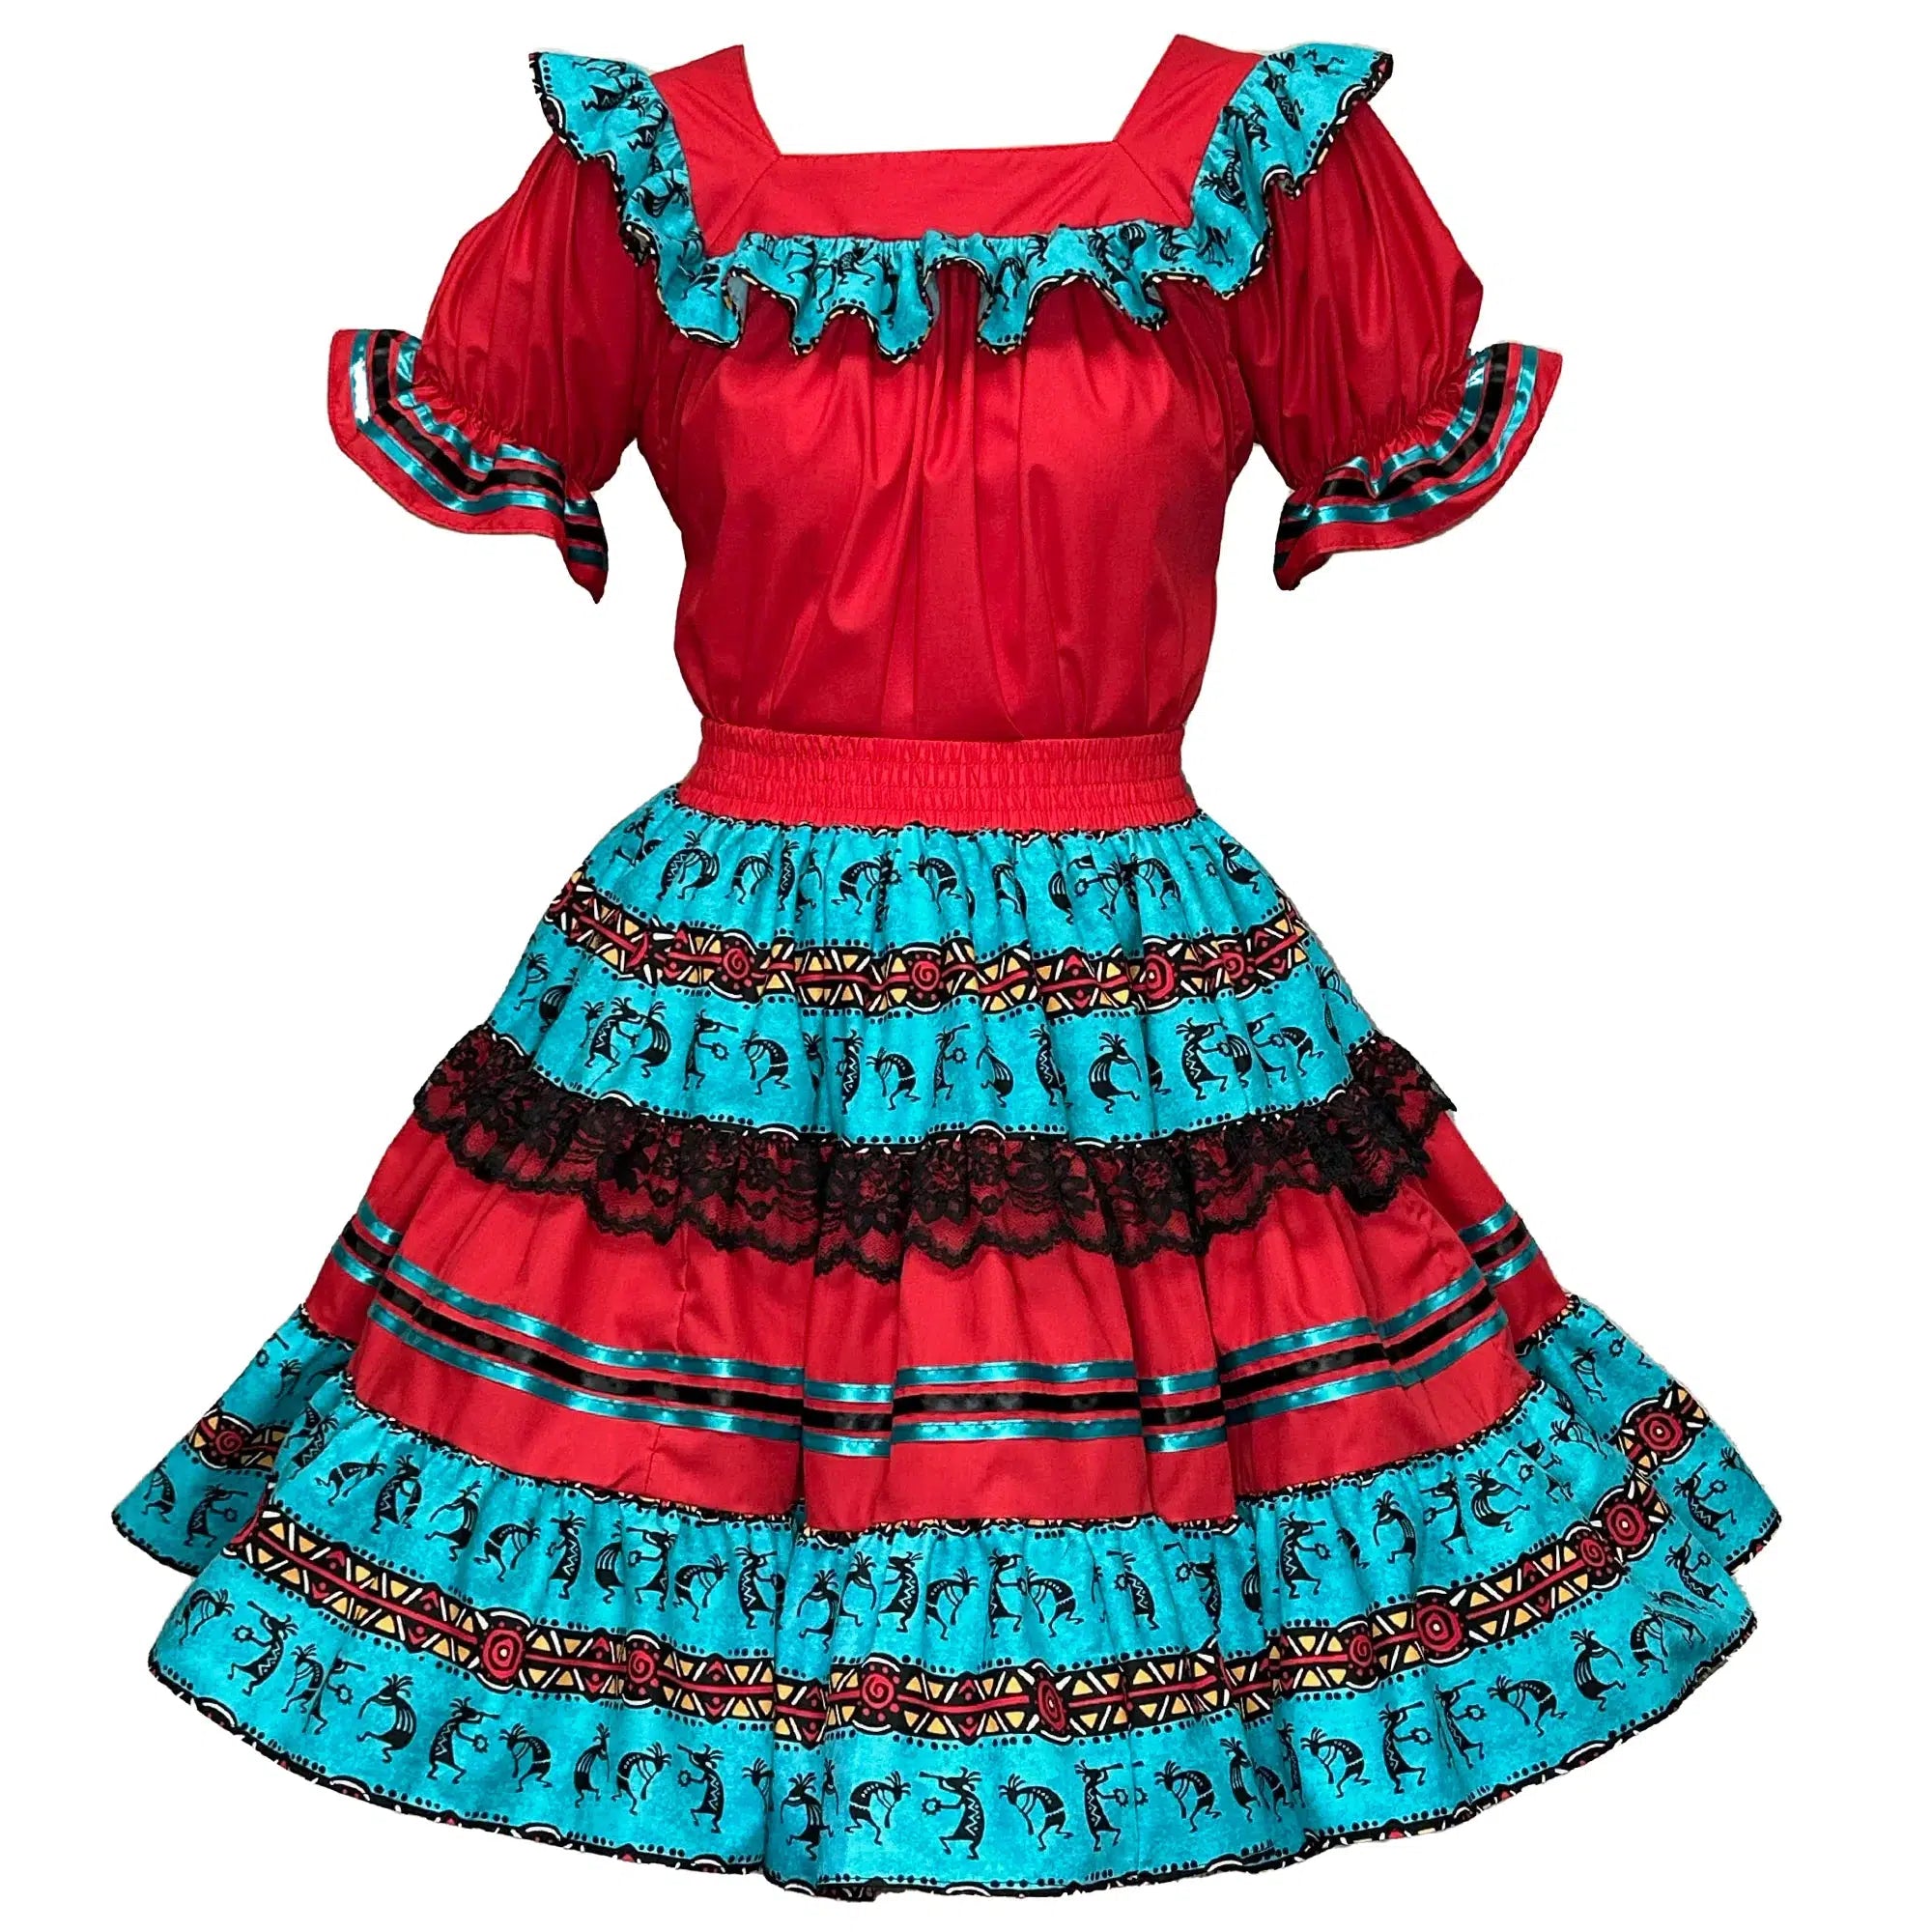 7680 Two piece Square Dance Outfit in Black Print Fabric accented with  White Lace